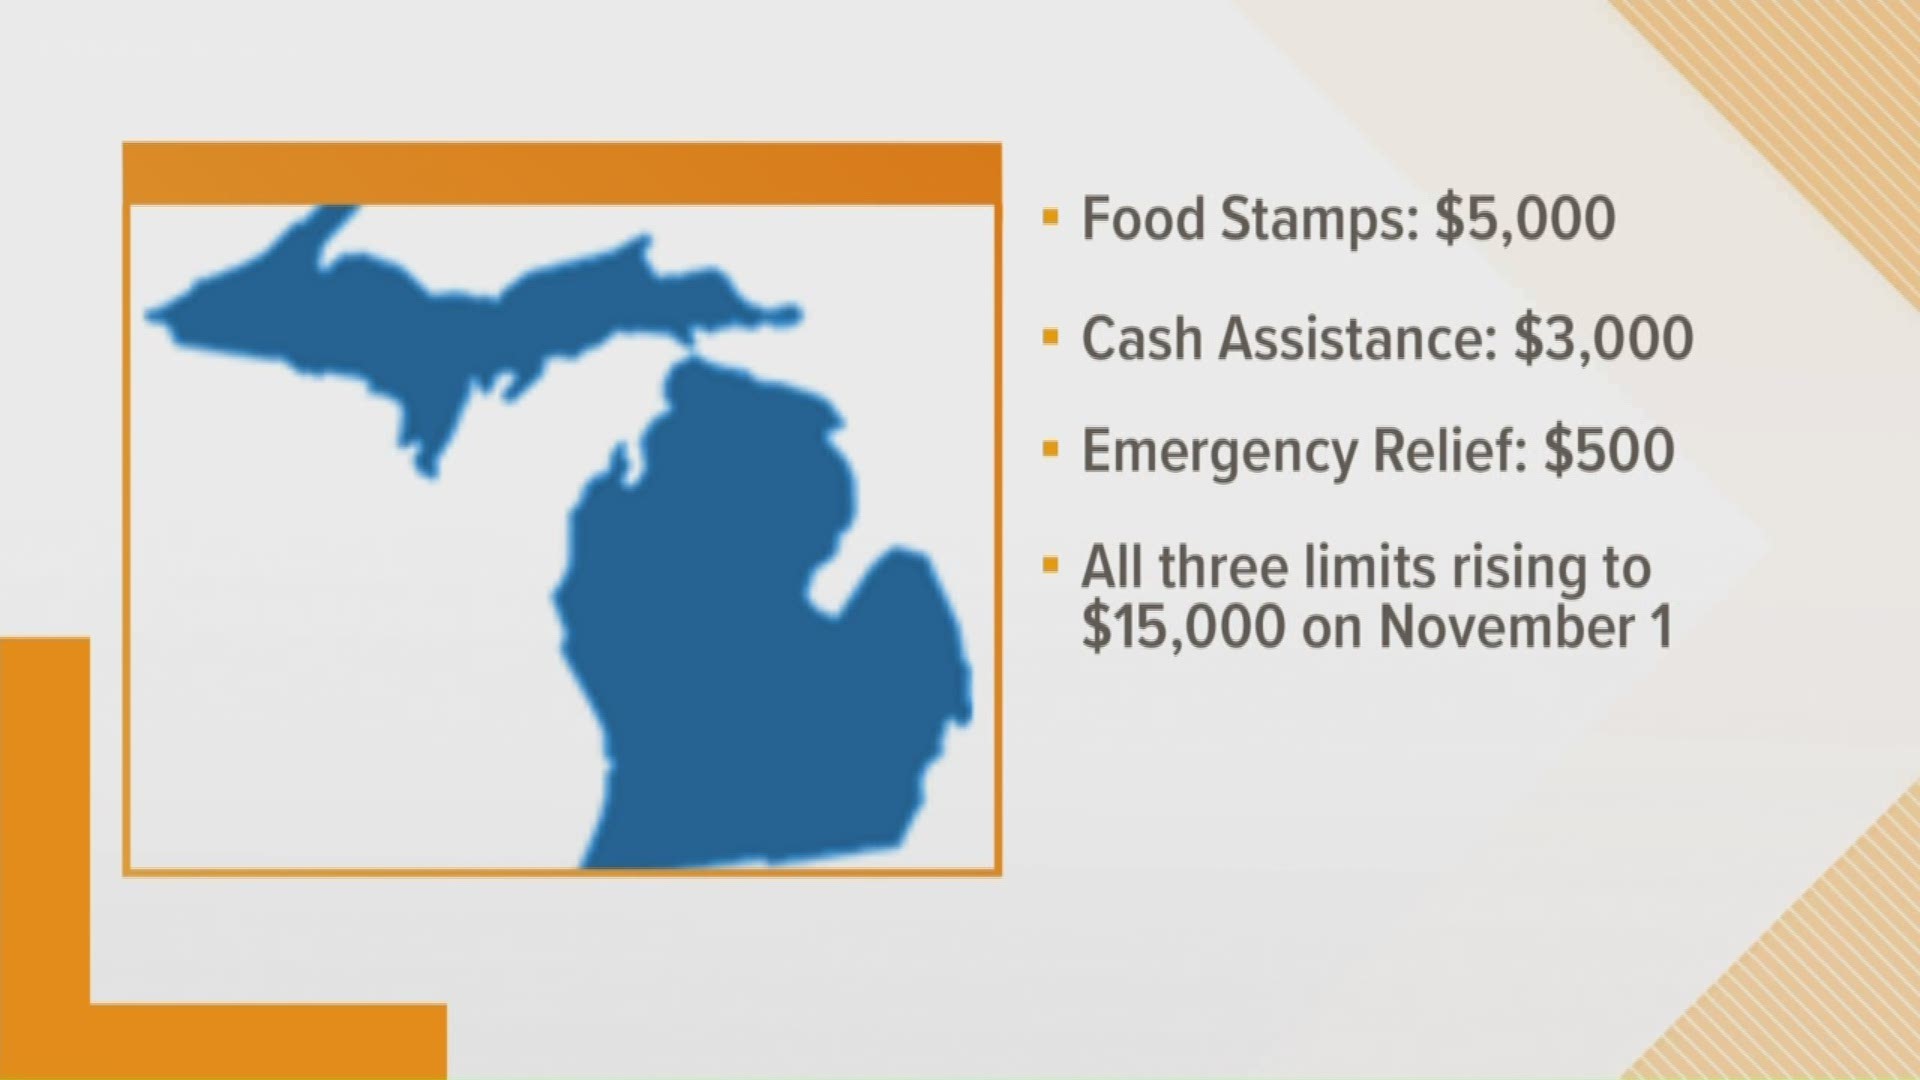 Michigan will make it easier for low-income residents to qualify for public assistance by relaxing some of the country's most restrictive asset tests.